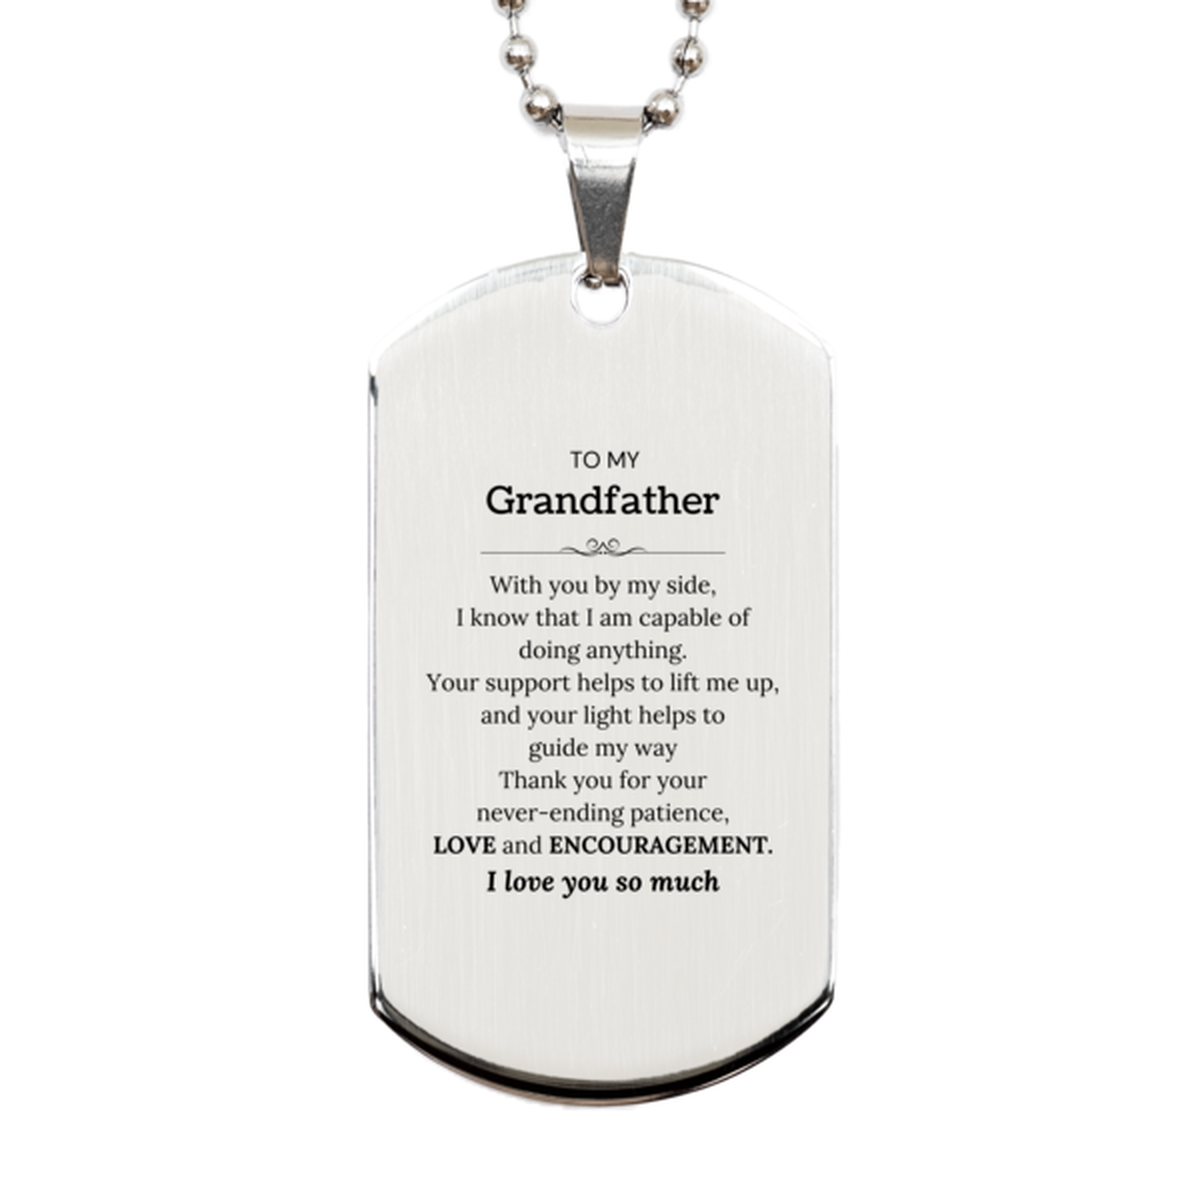 Appreciation Grandfather Silver Dog Tag Gifts, To My Grandfather Birthday Christmas Wedding Keepsake Gifts for Grandfather With you by my side, I know that I am capable of doing anything. I love you so much